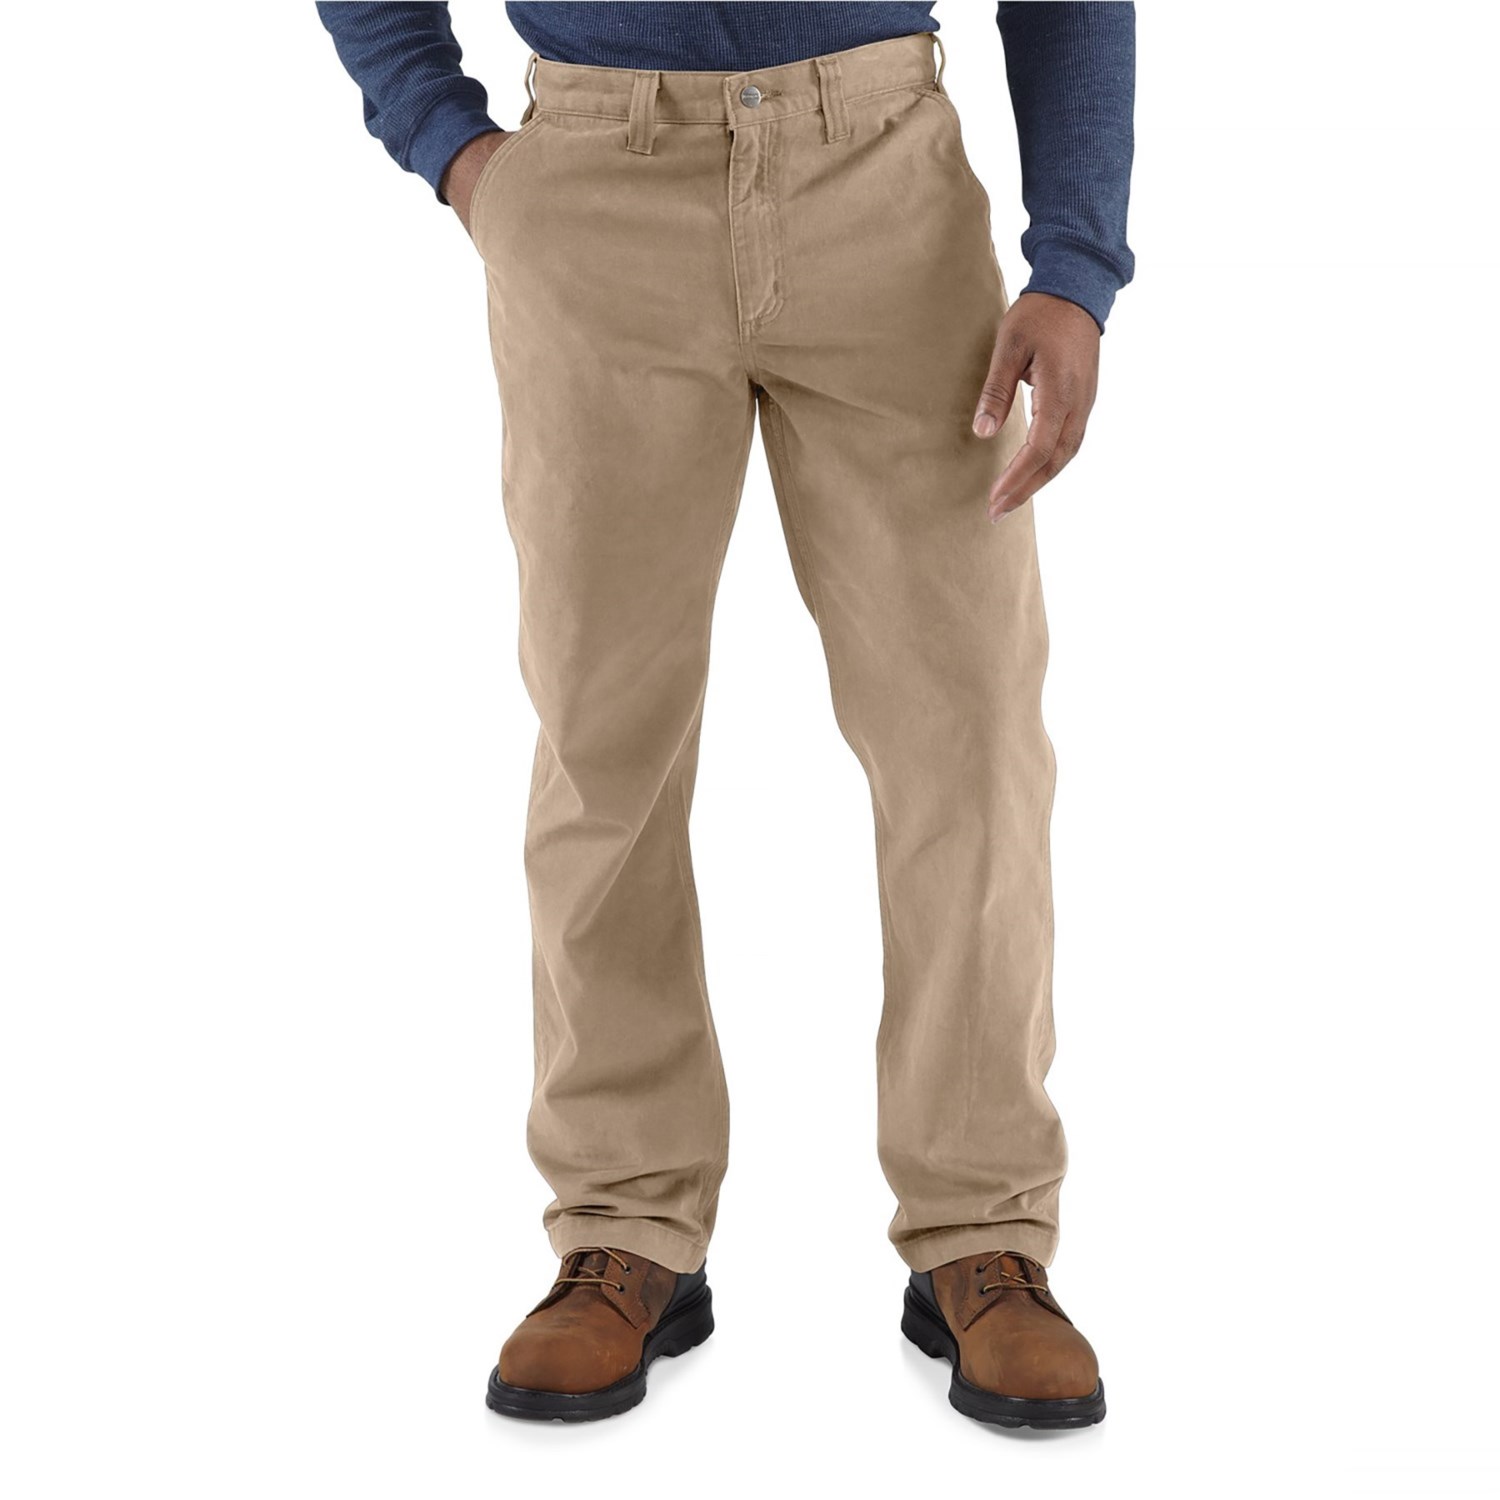 Carhartt 100095 Twill 5-Pocket Work Pants - Relaxed Fit